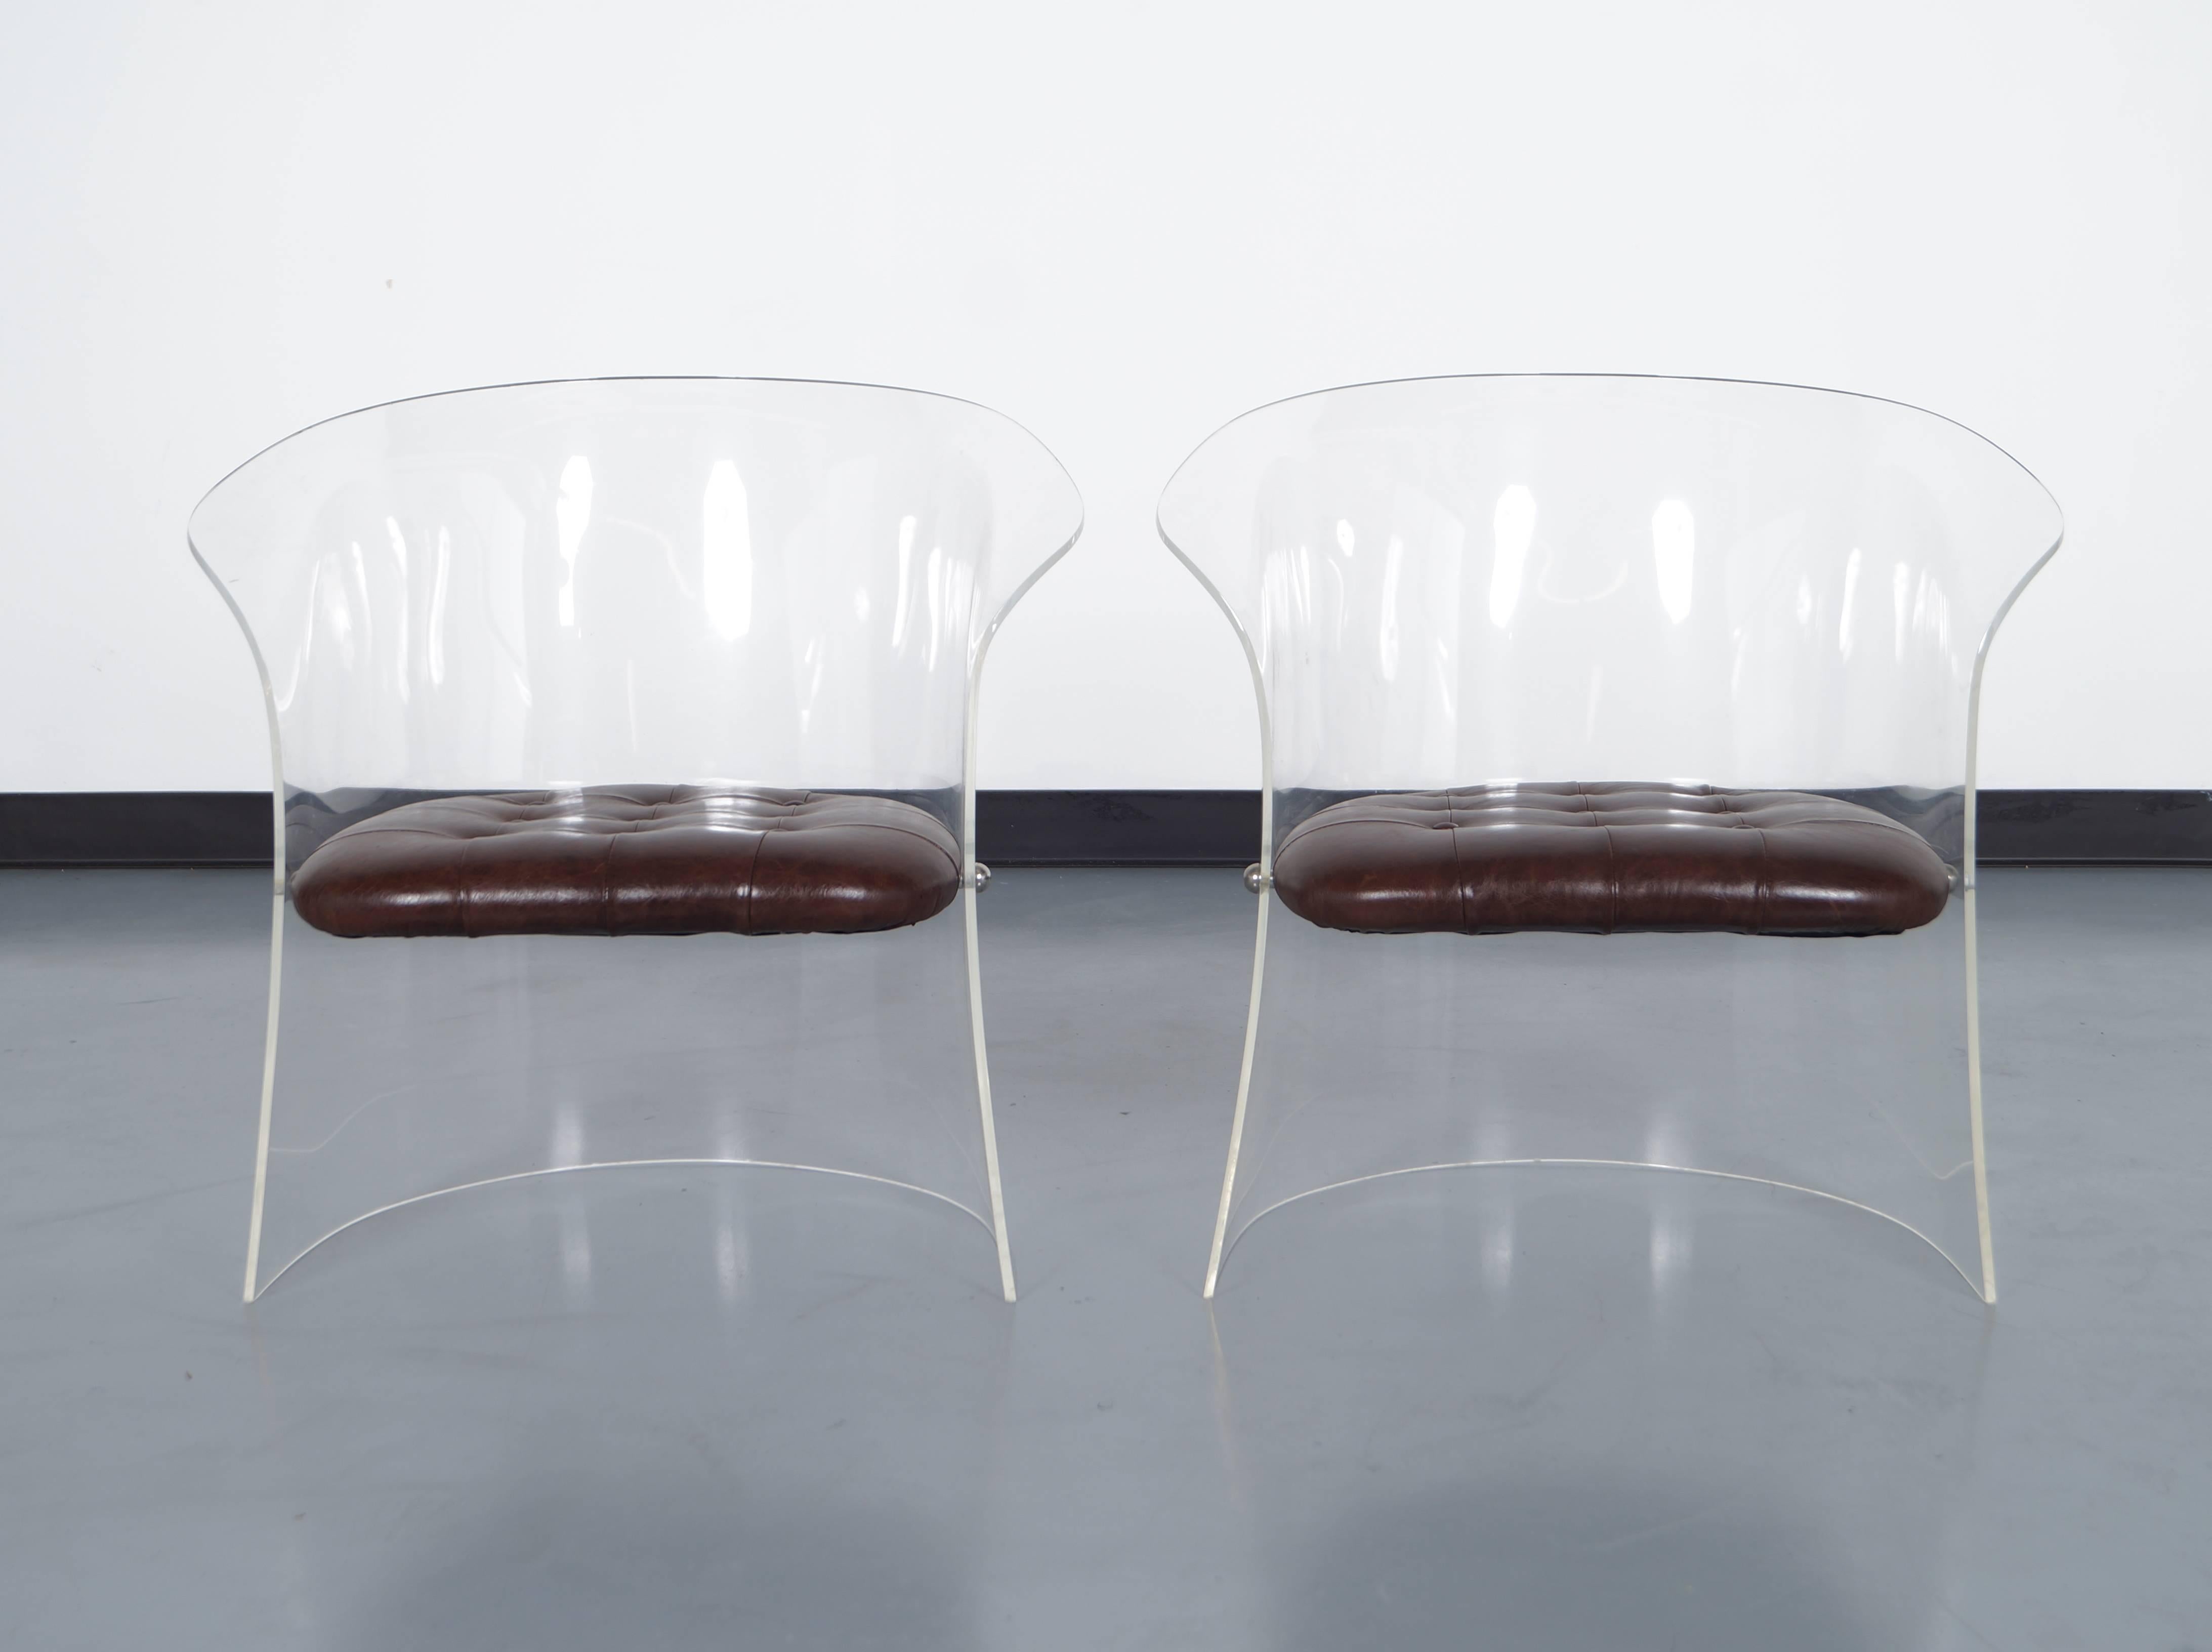 Pair of lucite chairs with tufted leather seats, circa 1970s. The chairs have curved backs and sides and the seats are attached by chrome covers.